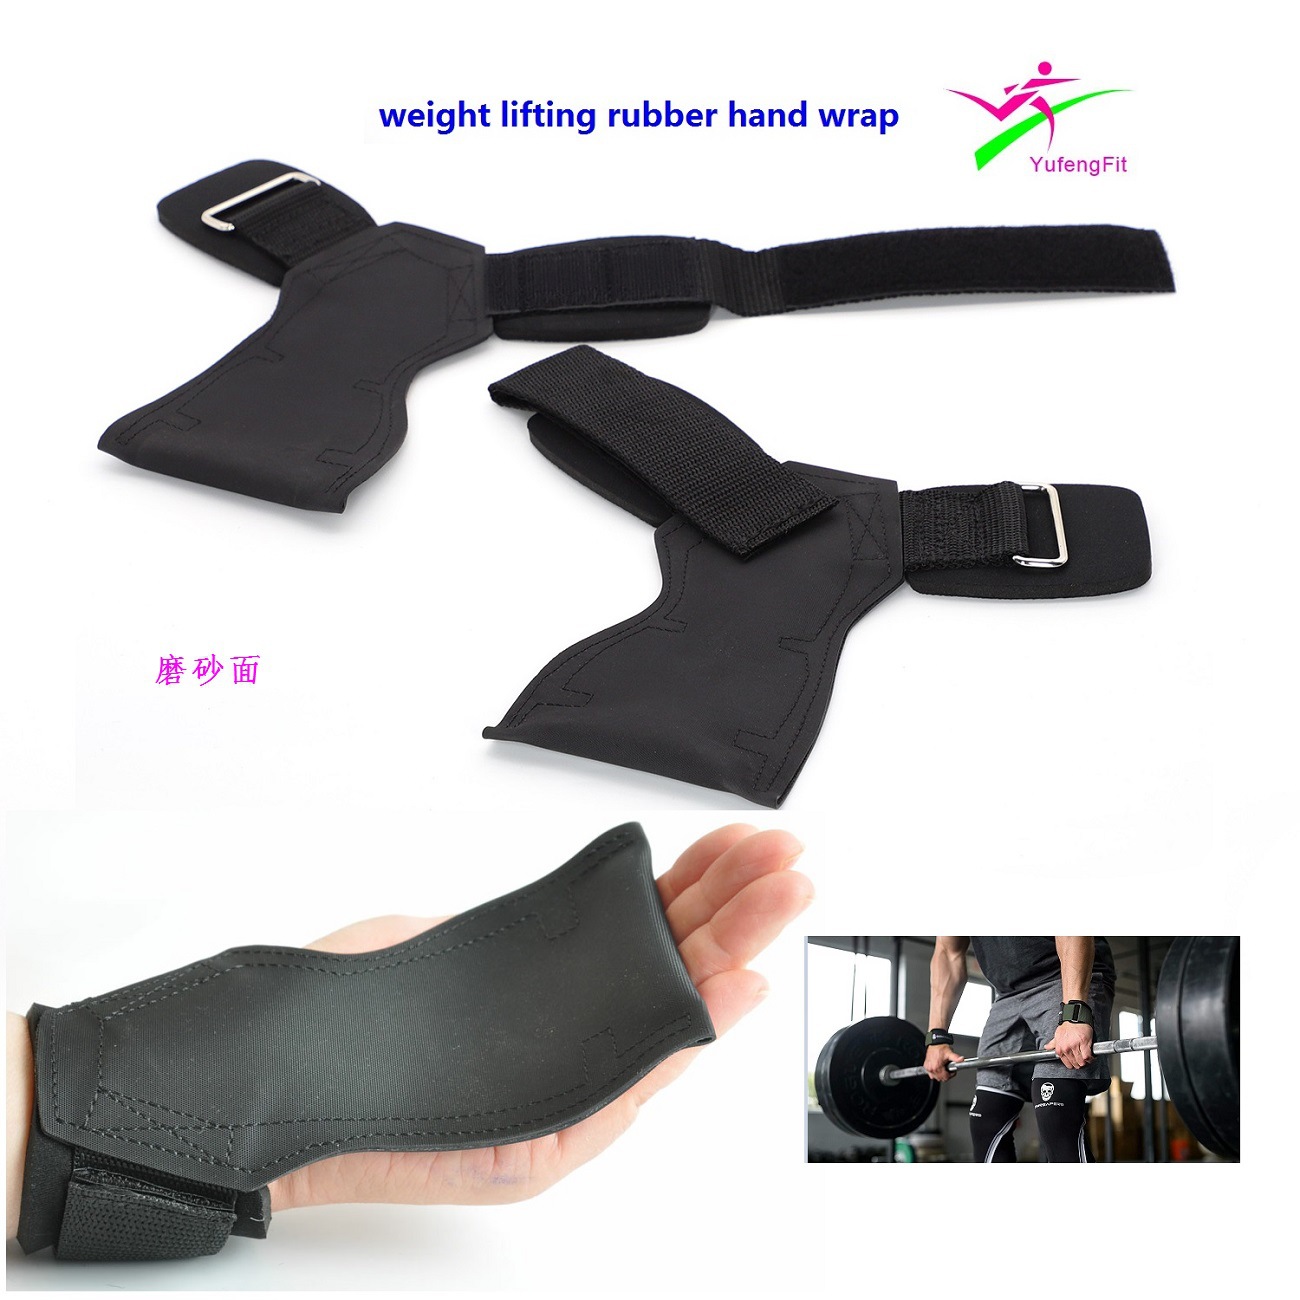 Cross border Specifically for rubber Hand guard Bodybuilding equipment motion protective clothing Twine Barbell Weightlifting Deadlift Wristband Help with